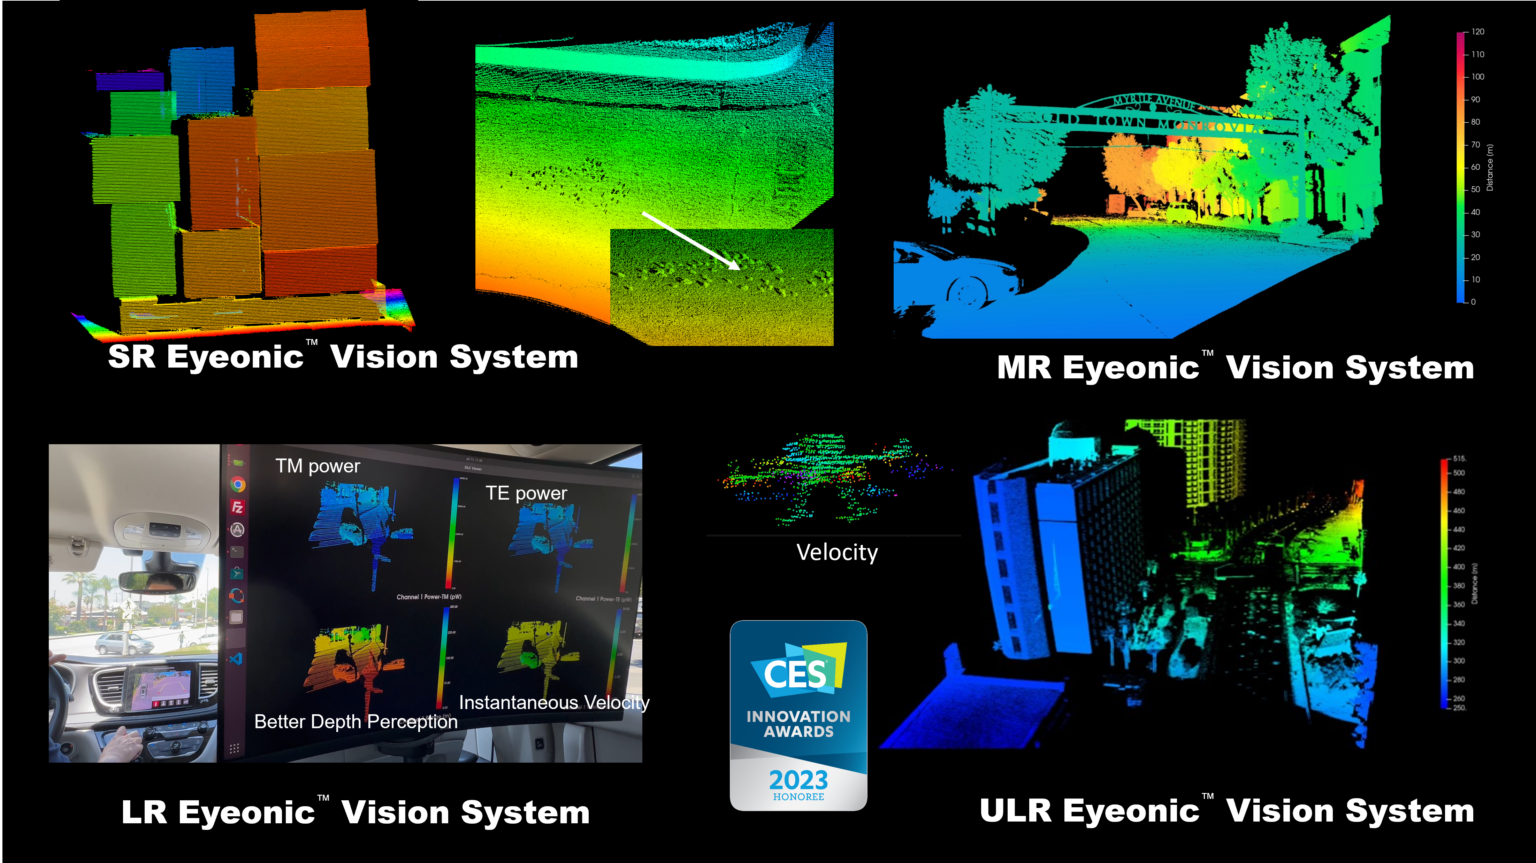 4 Eyeonic Vision Systems from SiLC, a leading edge LiDAR company